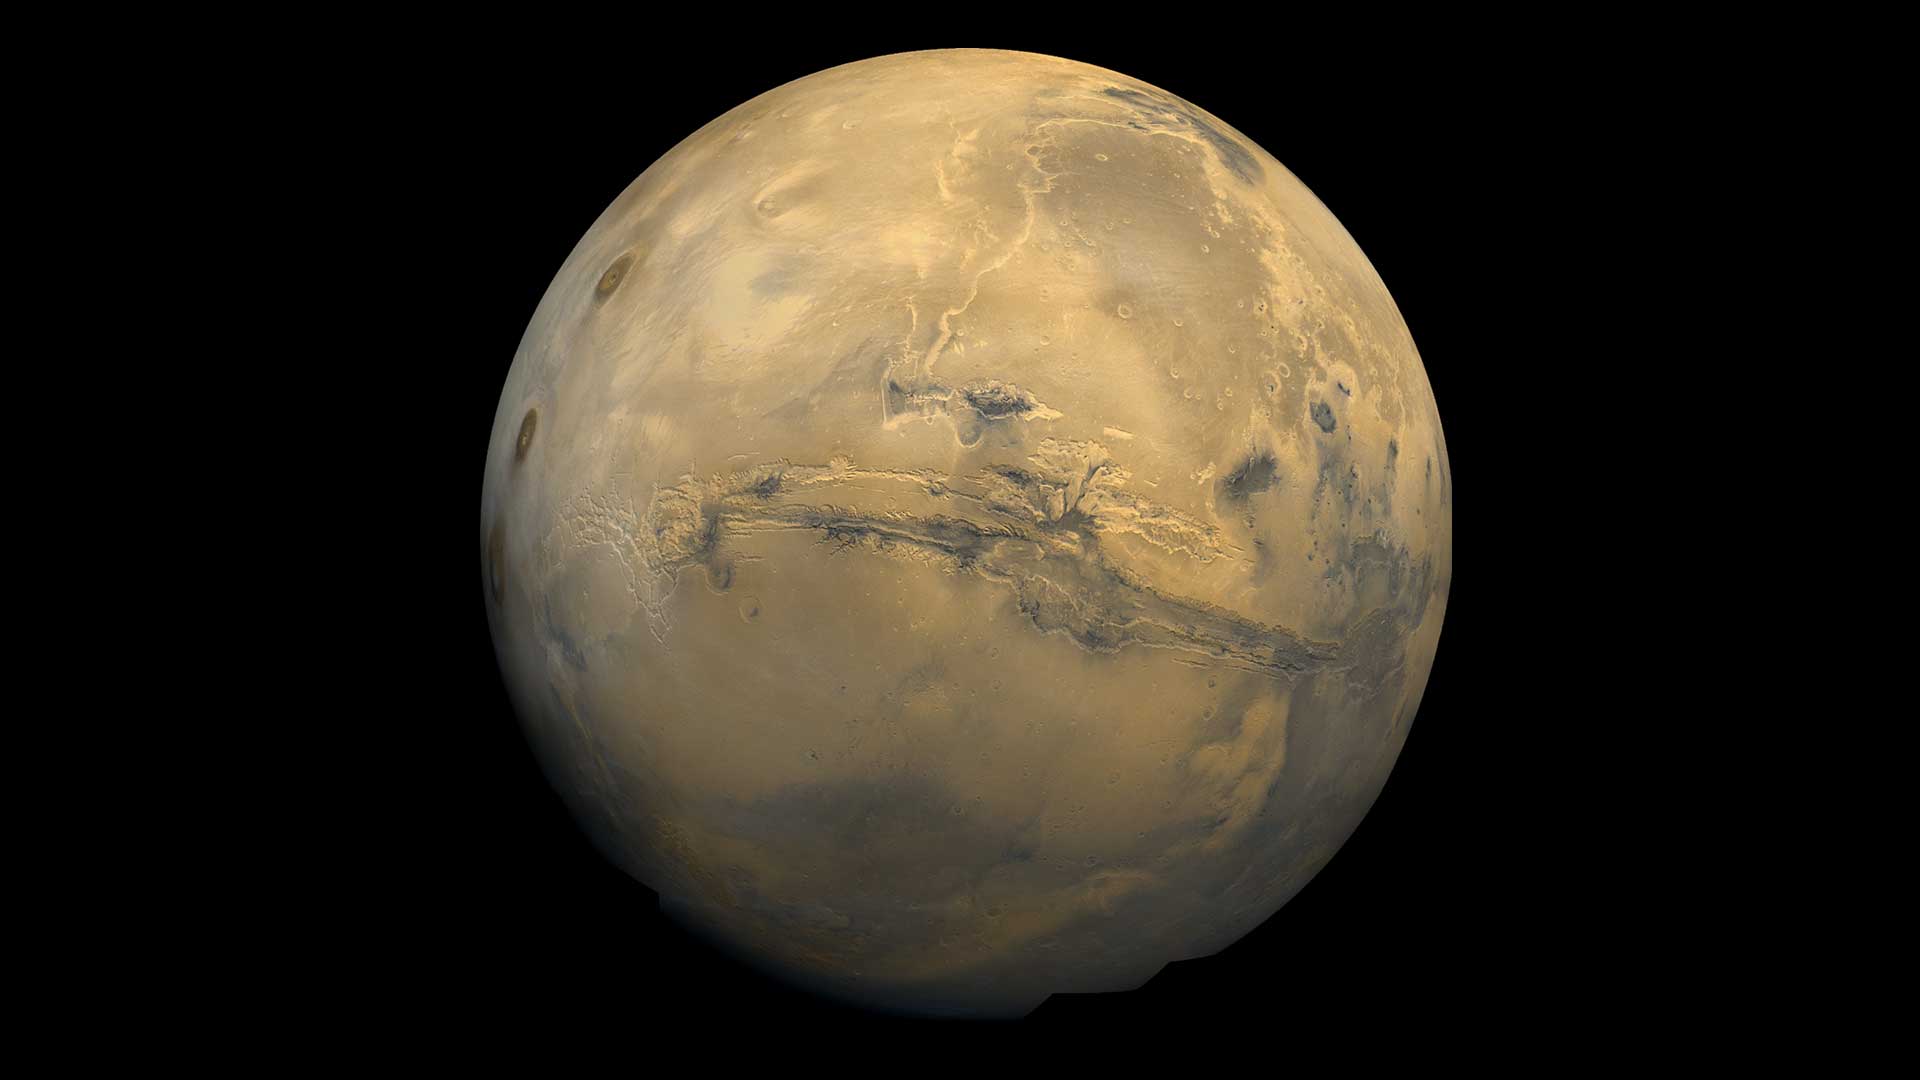 Mars is a reddish brown in this image from a spacecraft. A deep gash is visible across the center of the planet.